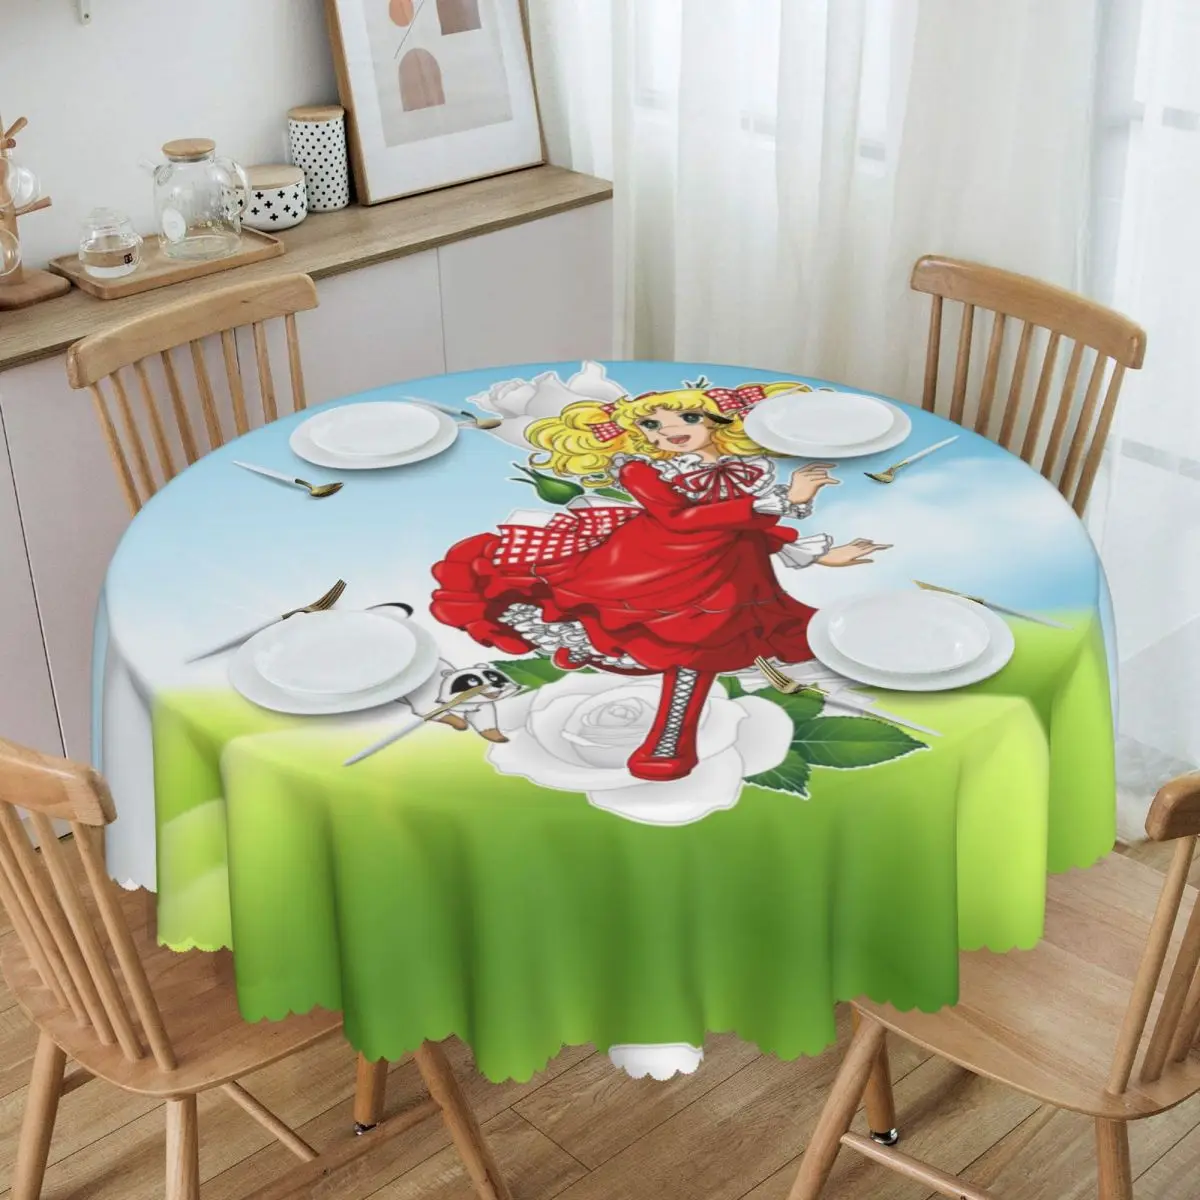 

Round Waterproof Kawaii Girl Candy Klin Table Cover Summer Edit Candice Tablecloth for Picnic 60 inch Table Cloth